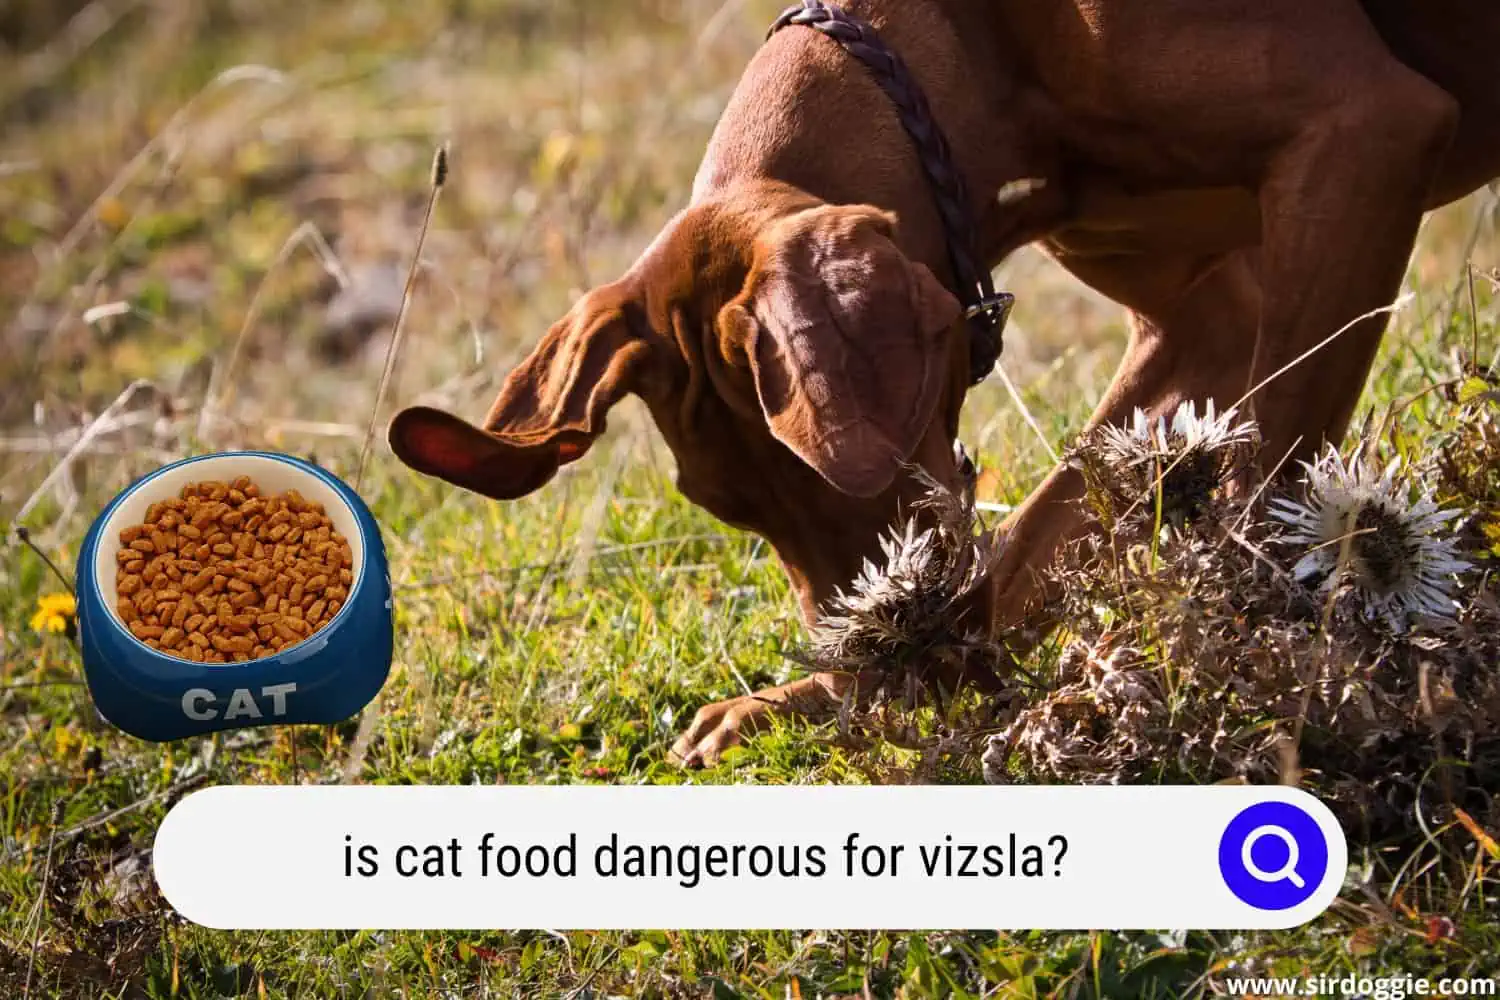 Cat food in a bowl and a Vizsla dog